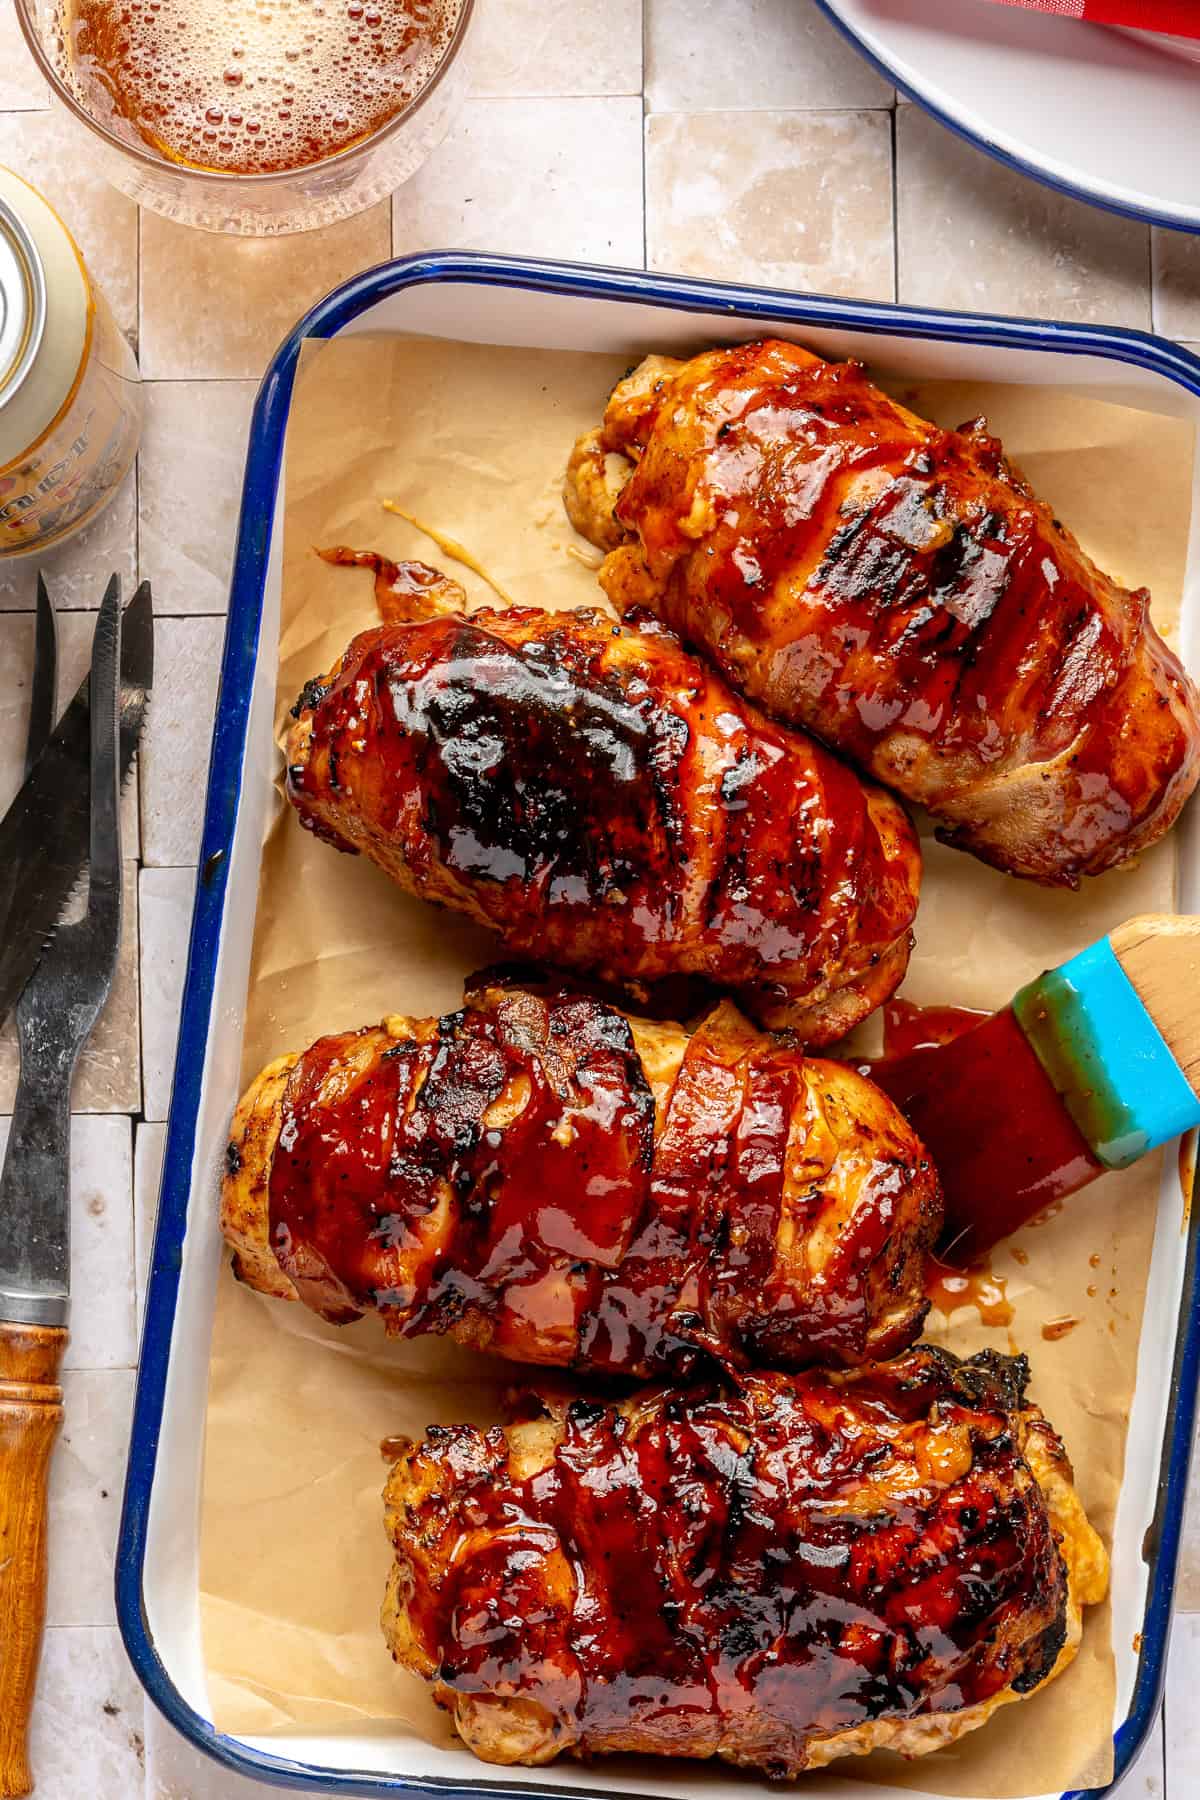 Bacon-wrapped chicken basted with BBQ sauce.